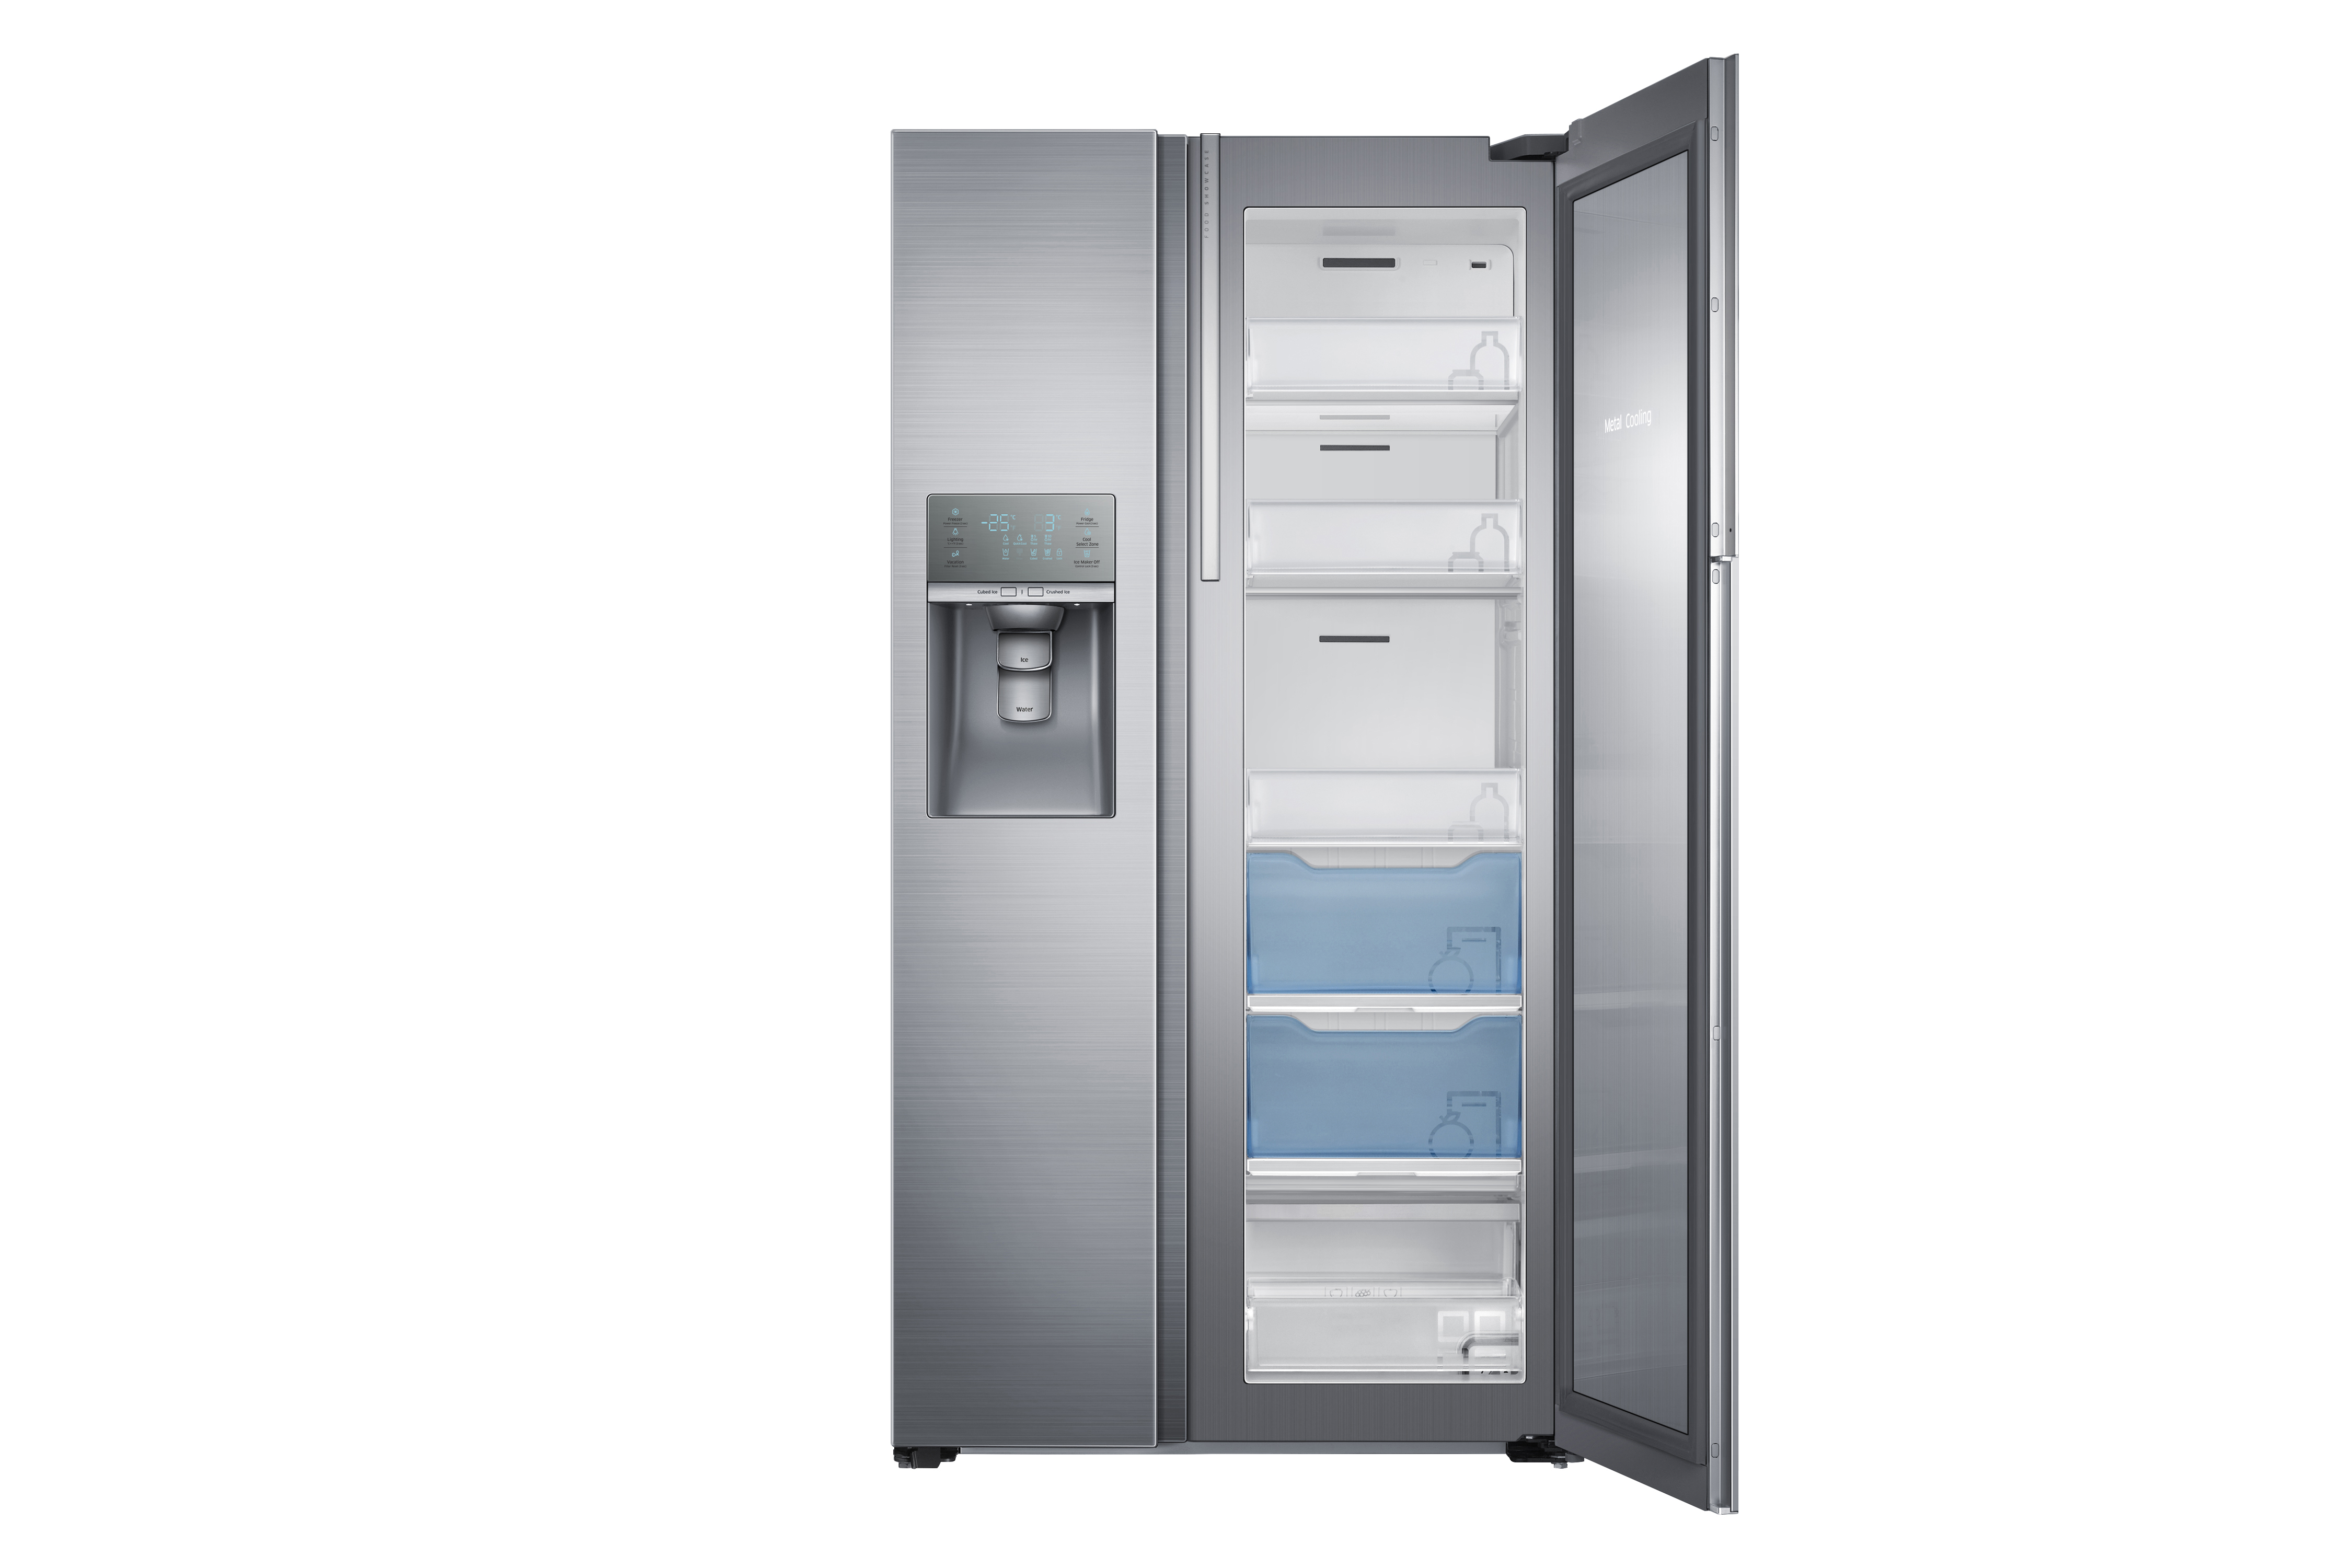 Samsung Showcase Side-by-Side Refrigerator Review #MasterYourHome @BestBuy